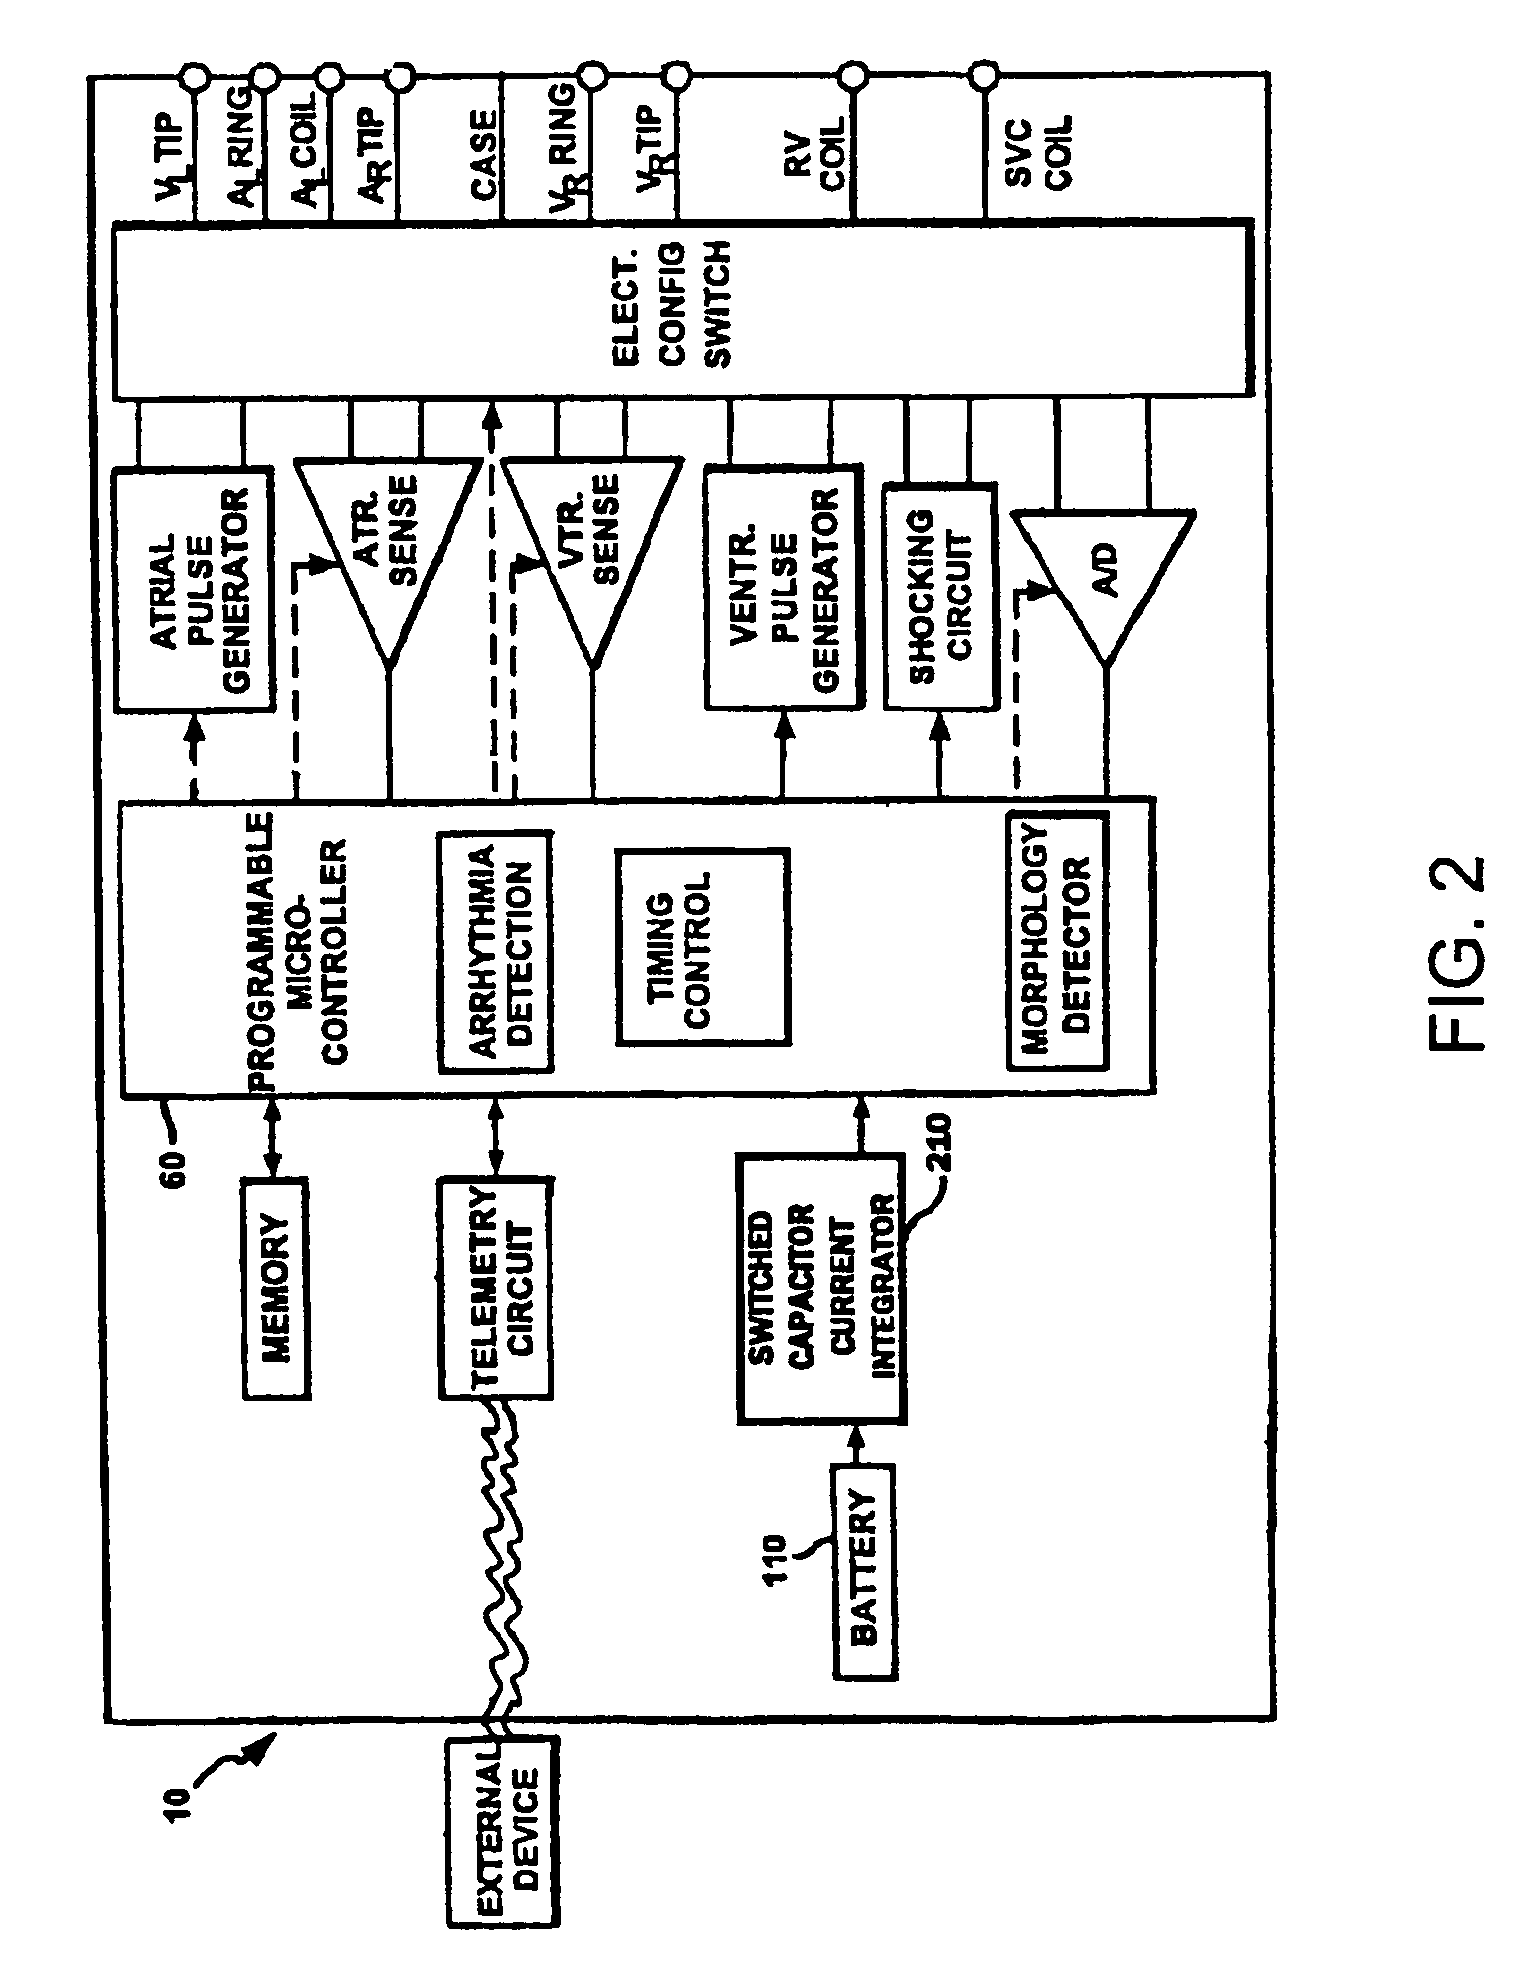 Method and apparatus for measuring battery depletion in implantable medical devices